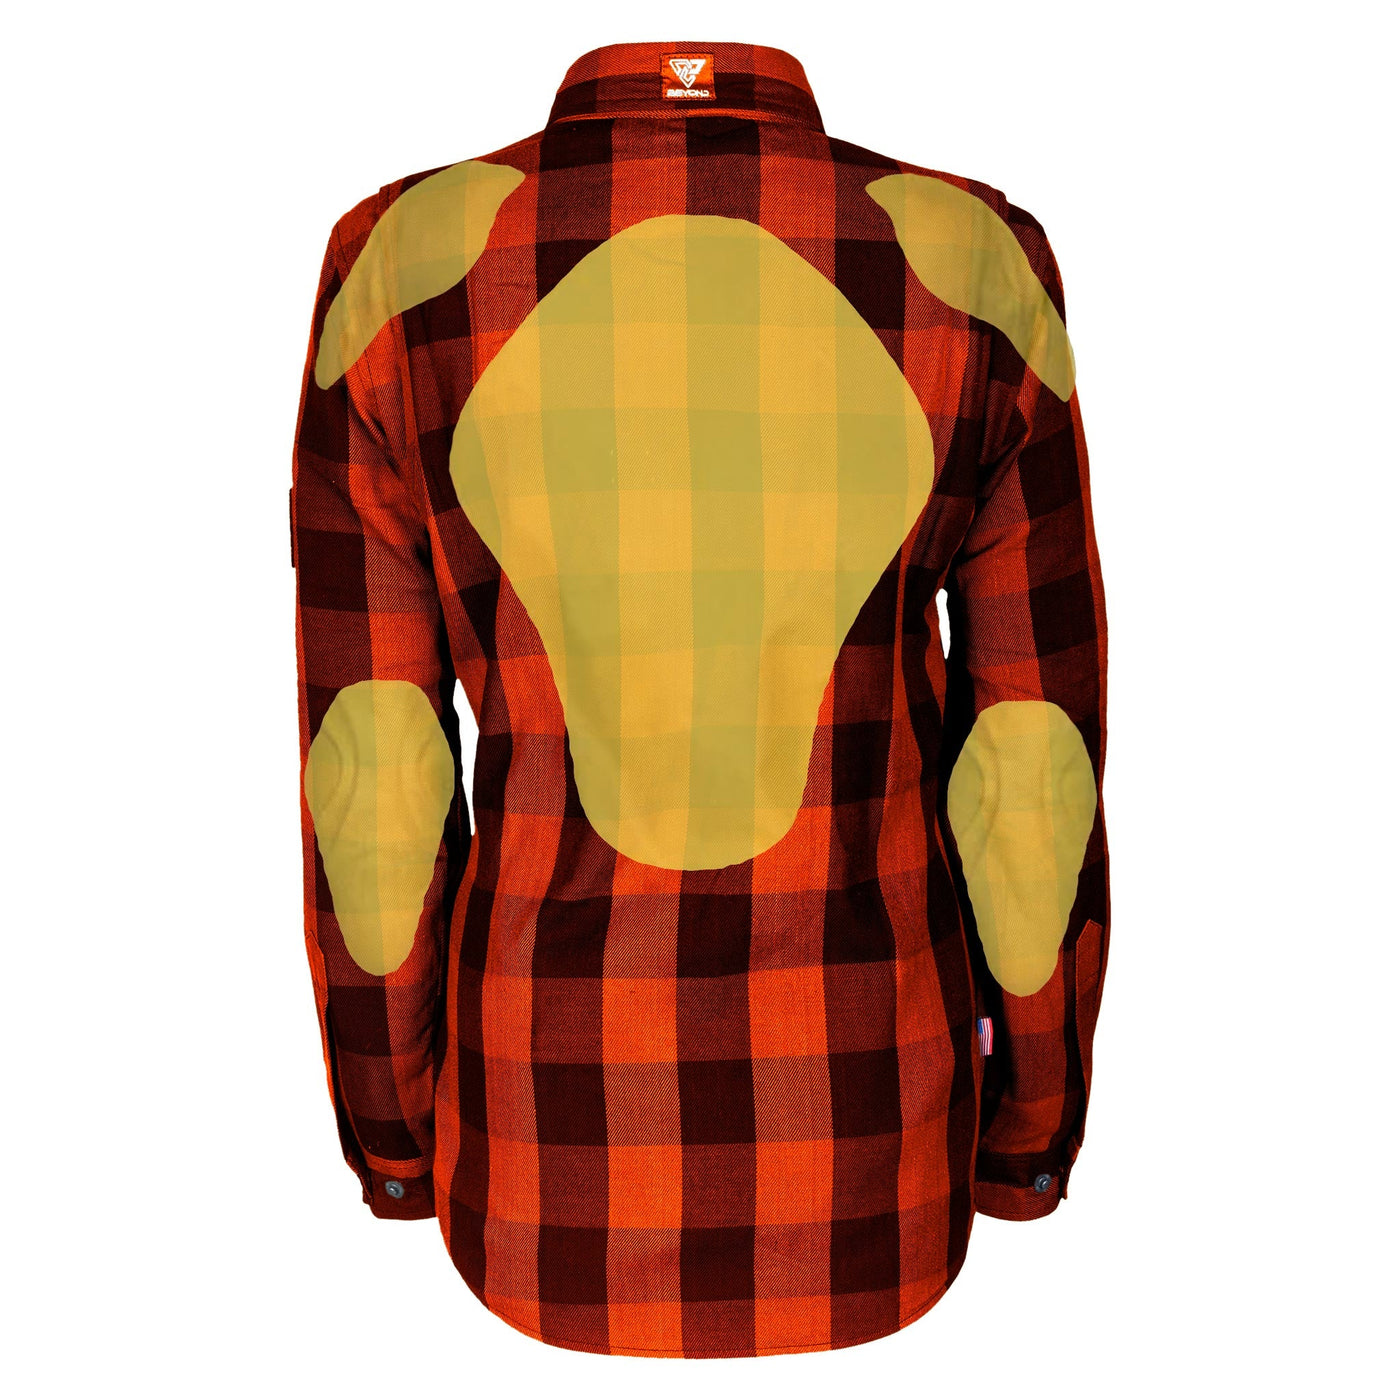 Protective Flannel Shirt with Pads for Women - Orange Checkered